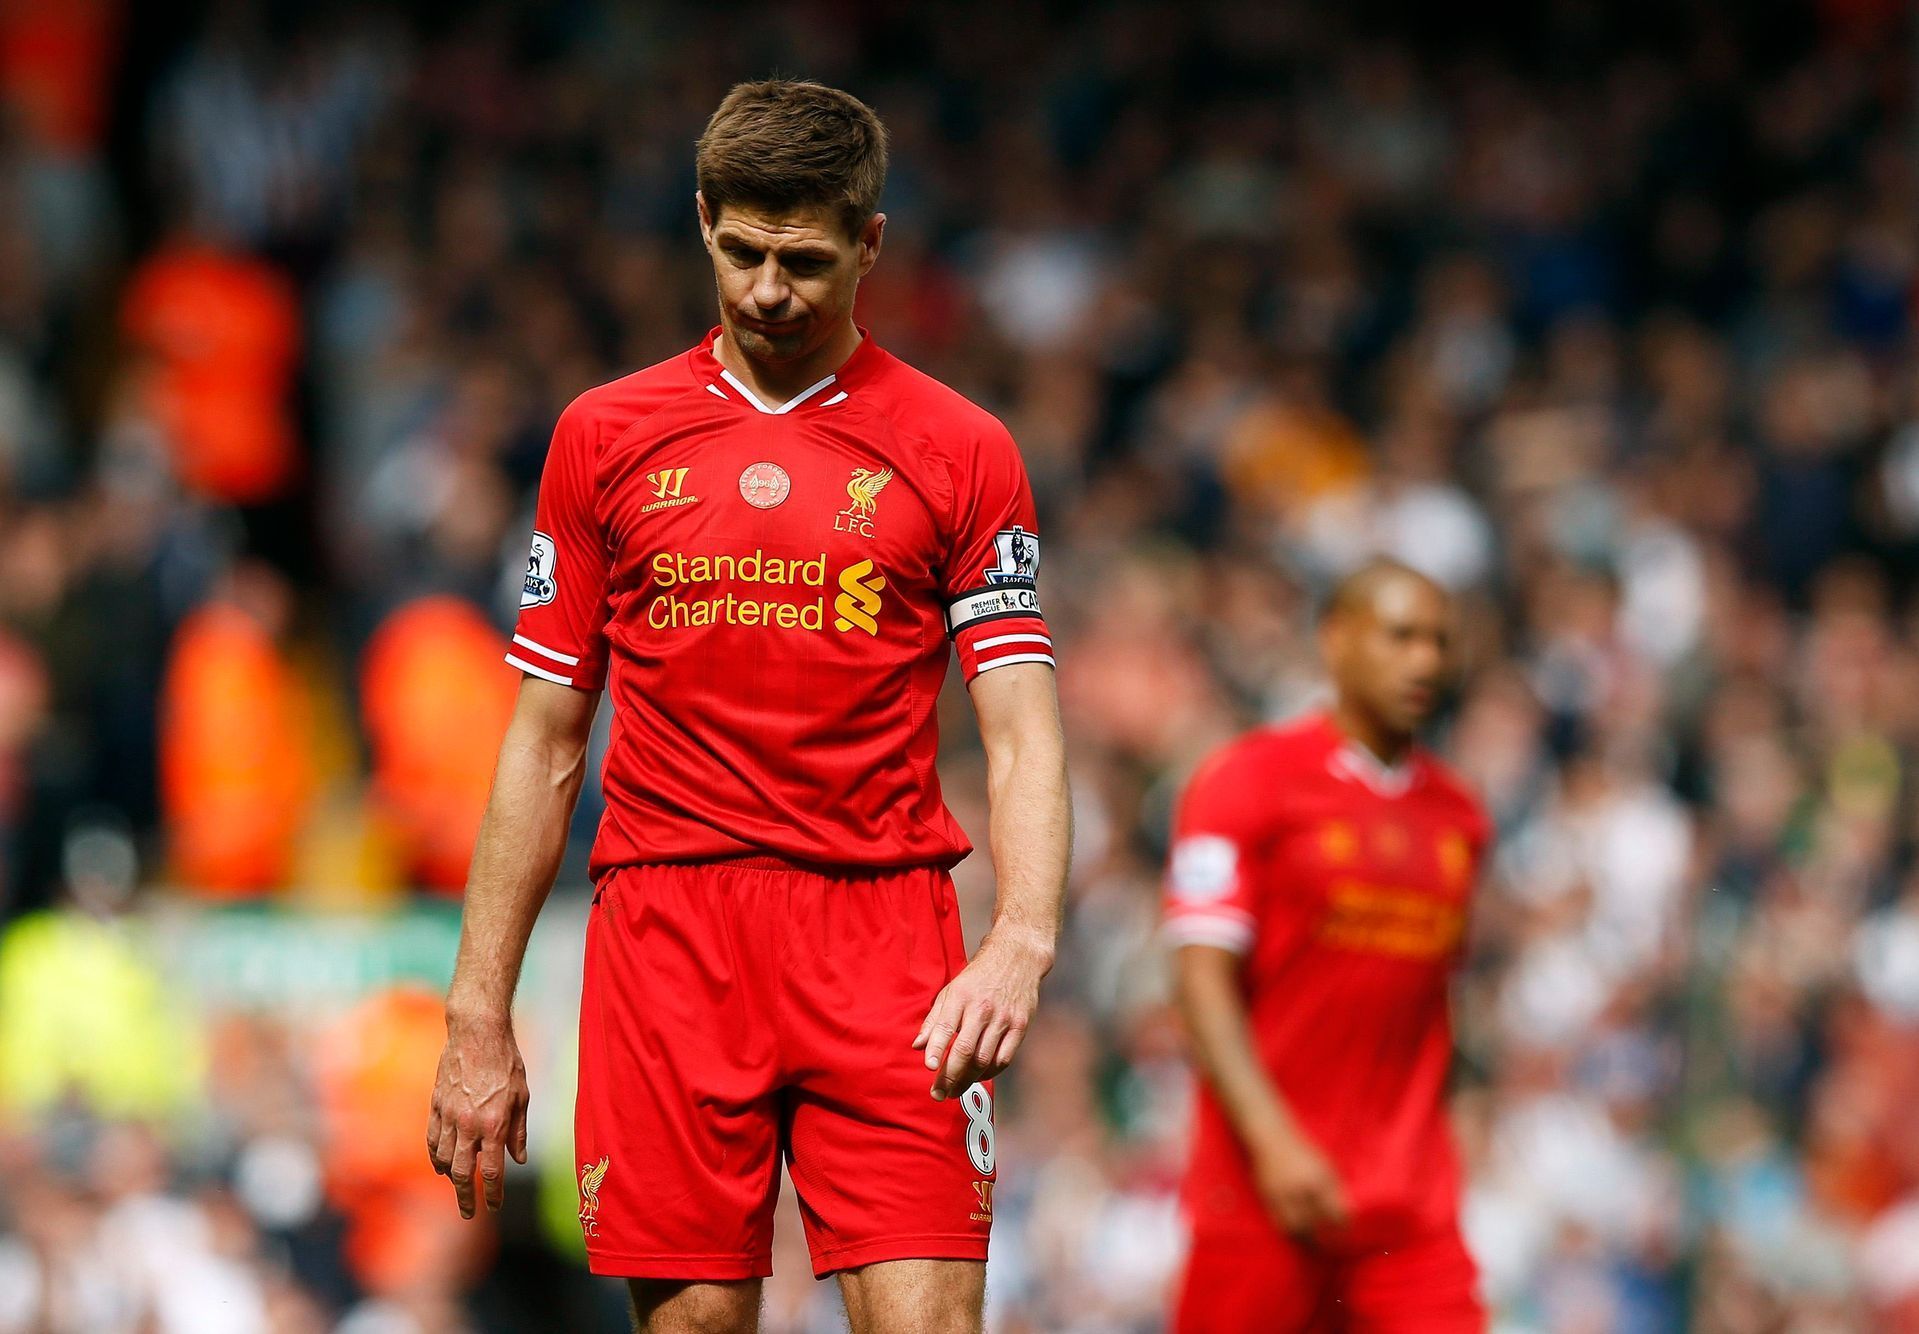 Liverpool's Steven Gerrard reacts following their final soccer match of the Premier League season against Newcastle United which they won 2-1, at Anfield in Liverpool